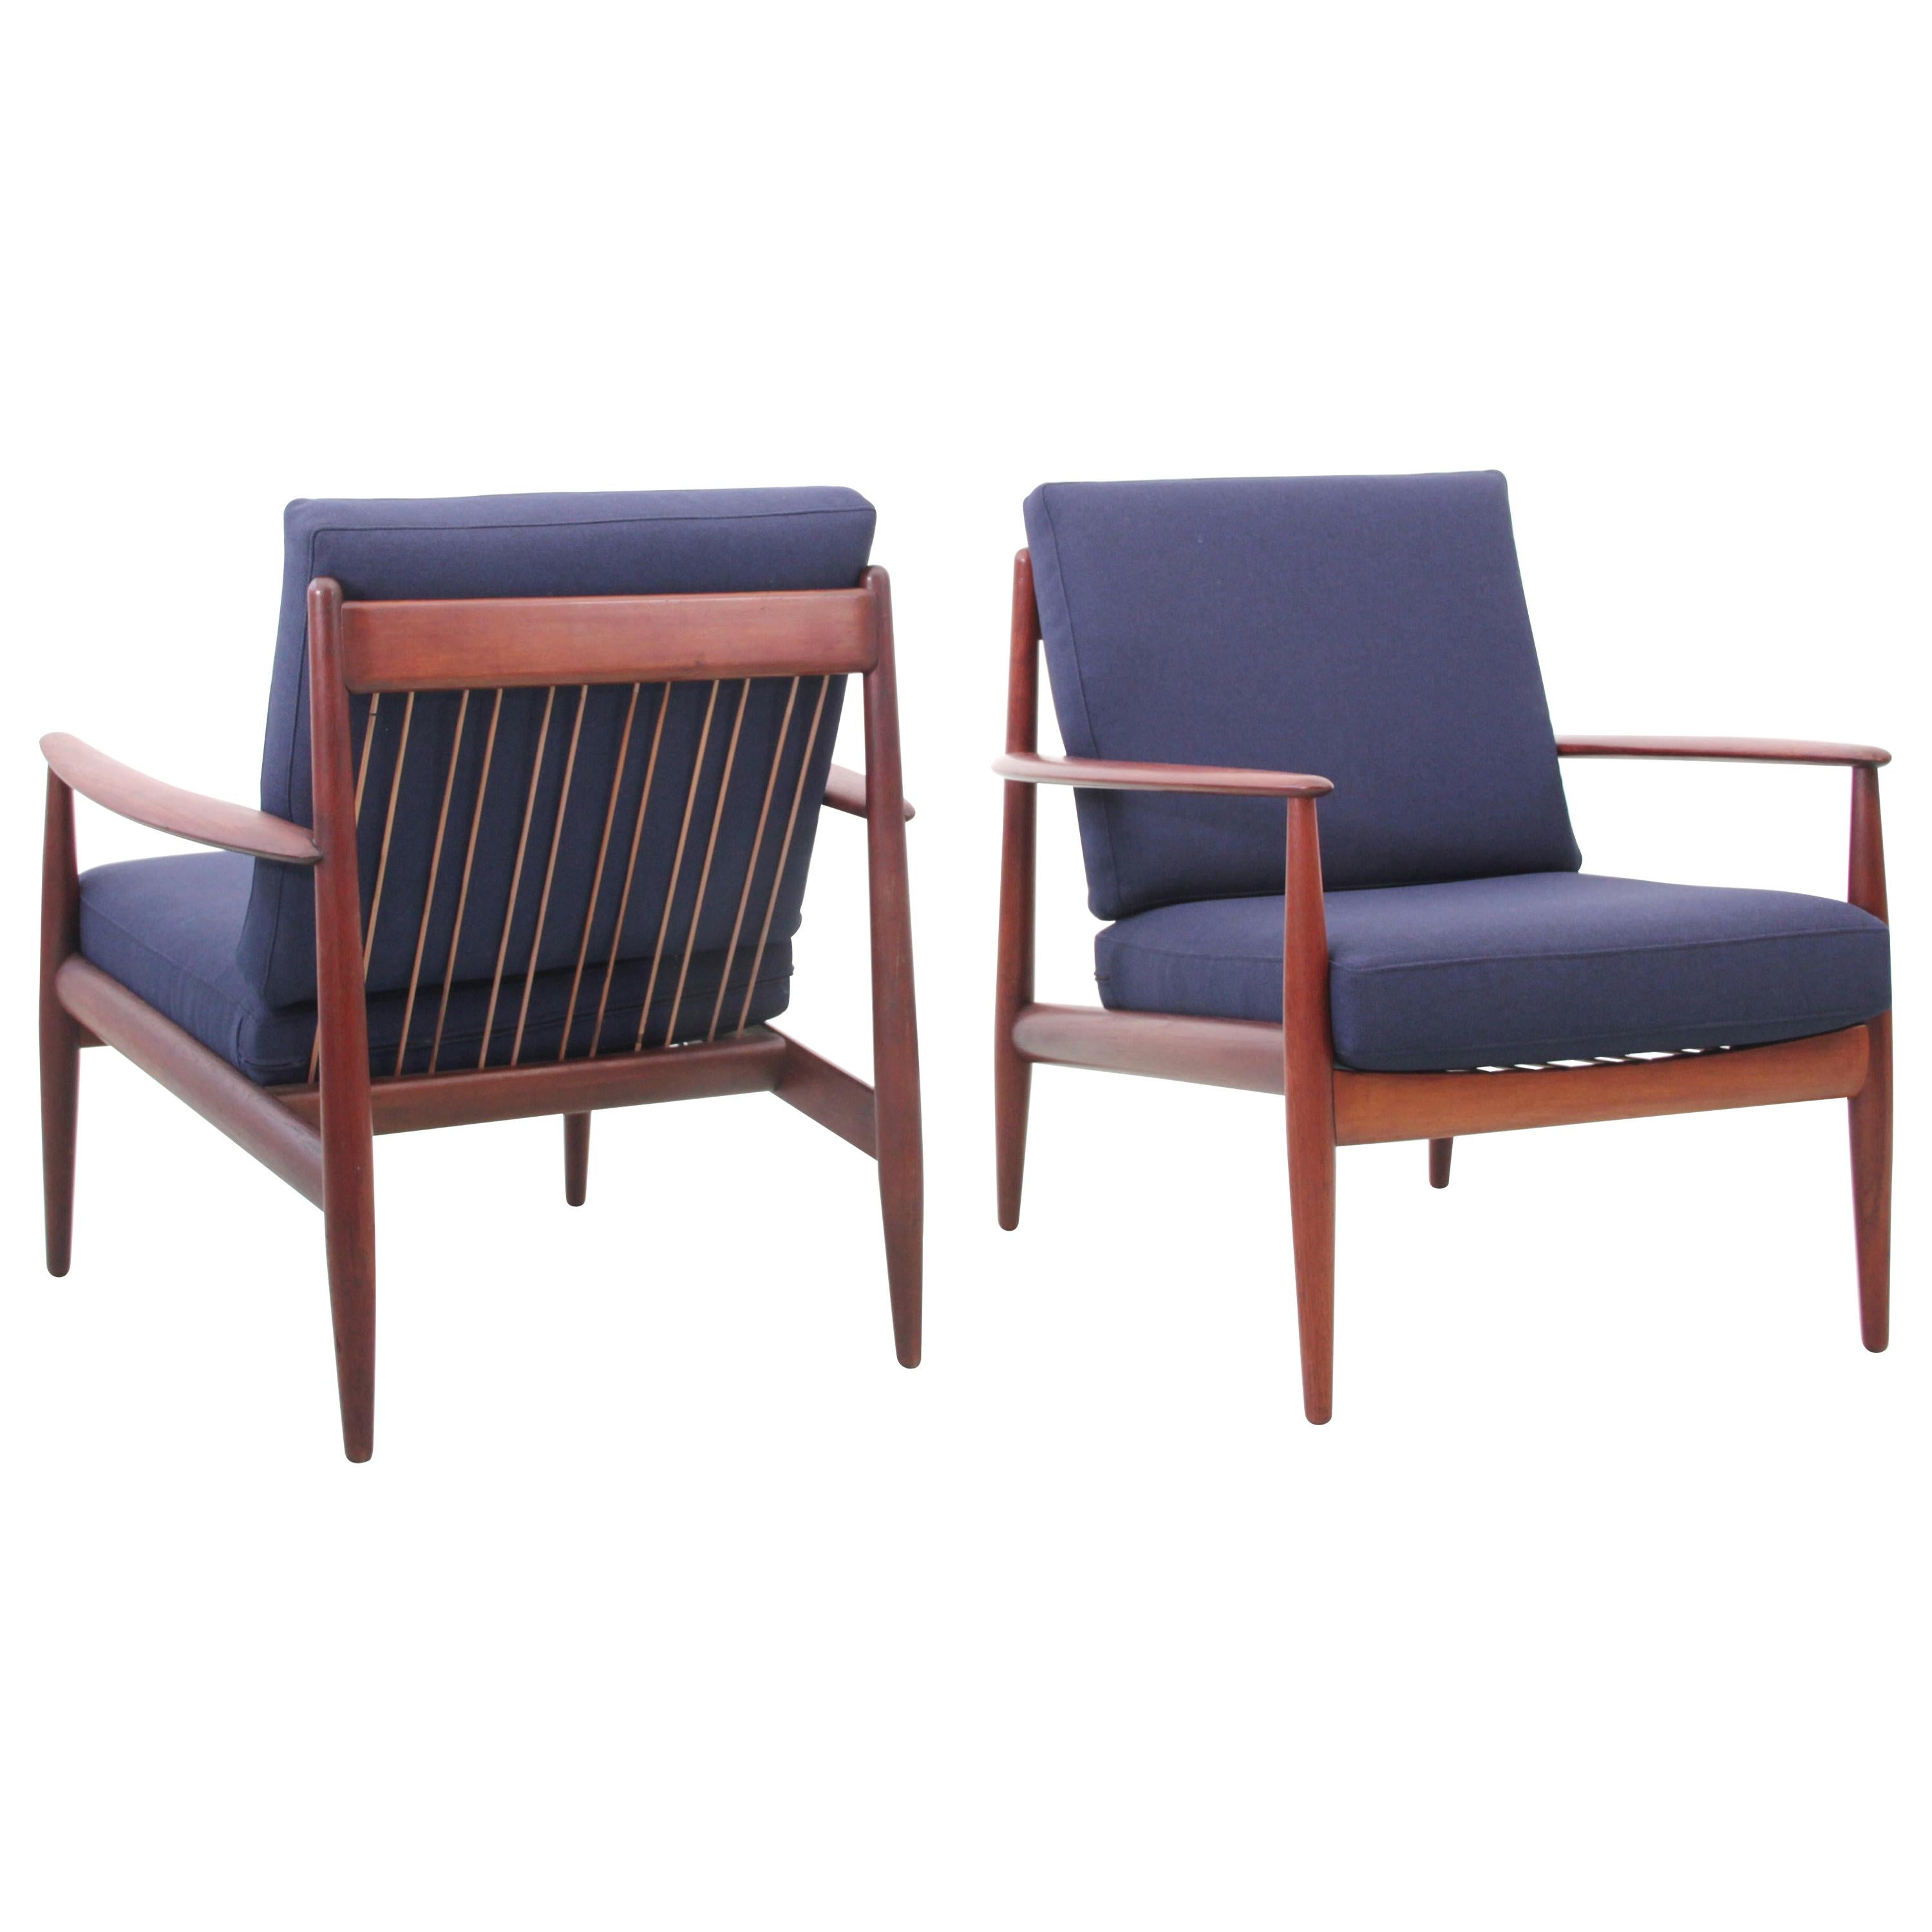 Mid-Century Modern Pair of Lounge Chairs in Teak Model 118 by Grete Jalk For Sale